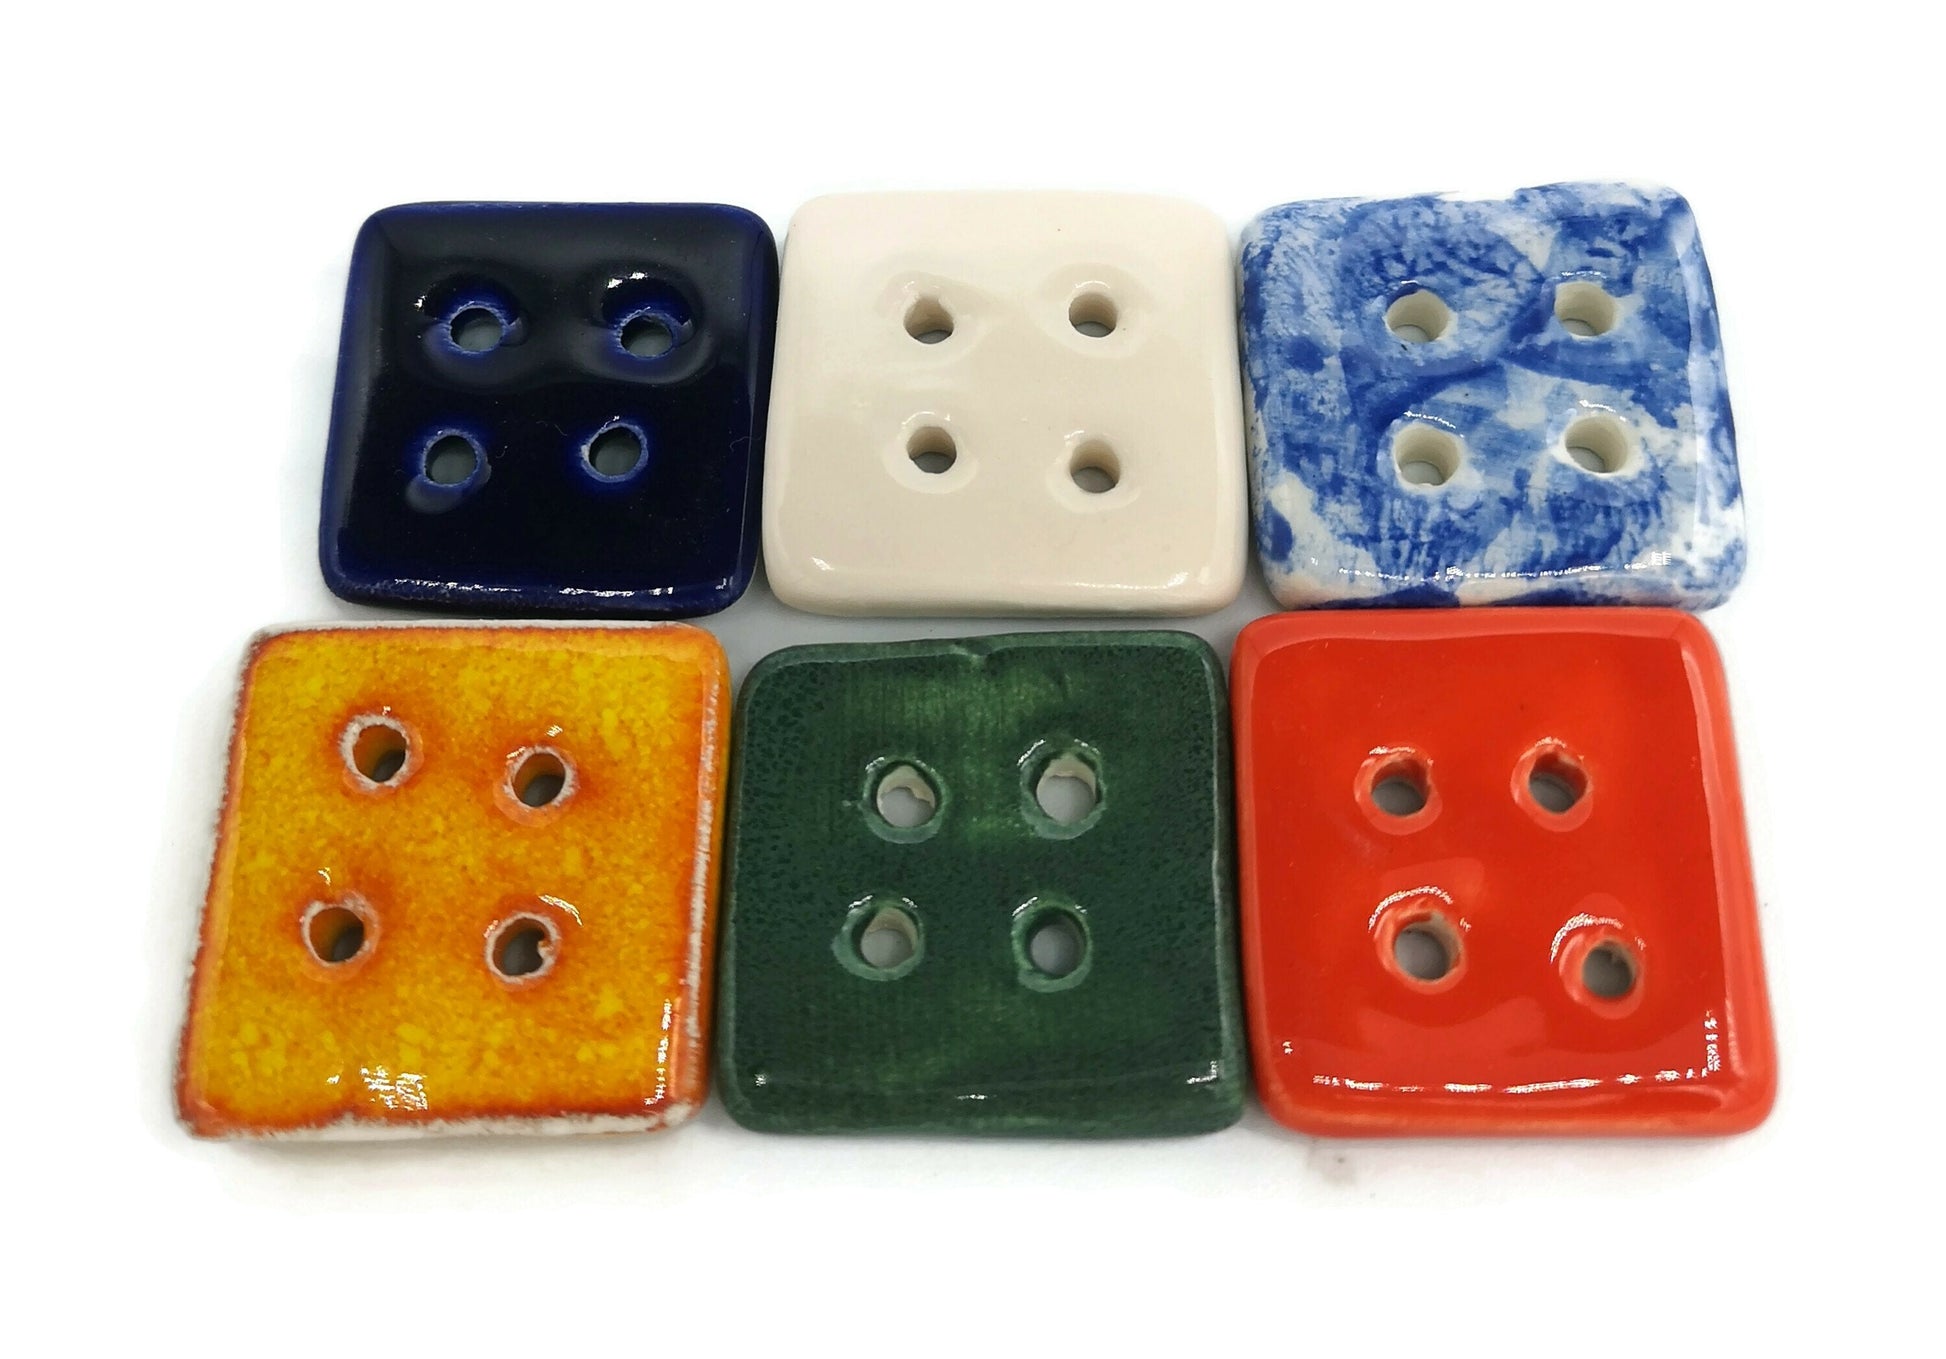 6Pc 30mm Handmade Ceramic Extra Large Sewing Buttons, Novelty Buttons For Crafts, Unusual Square Colourful Buttons For Coat Or Jacket - Ceramica Ana Rafael